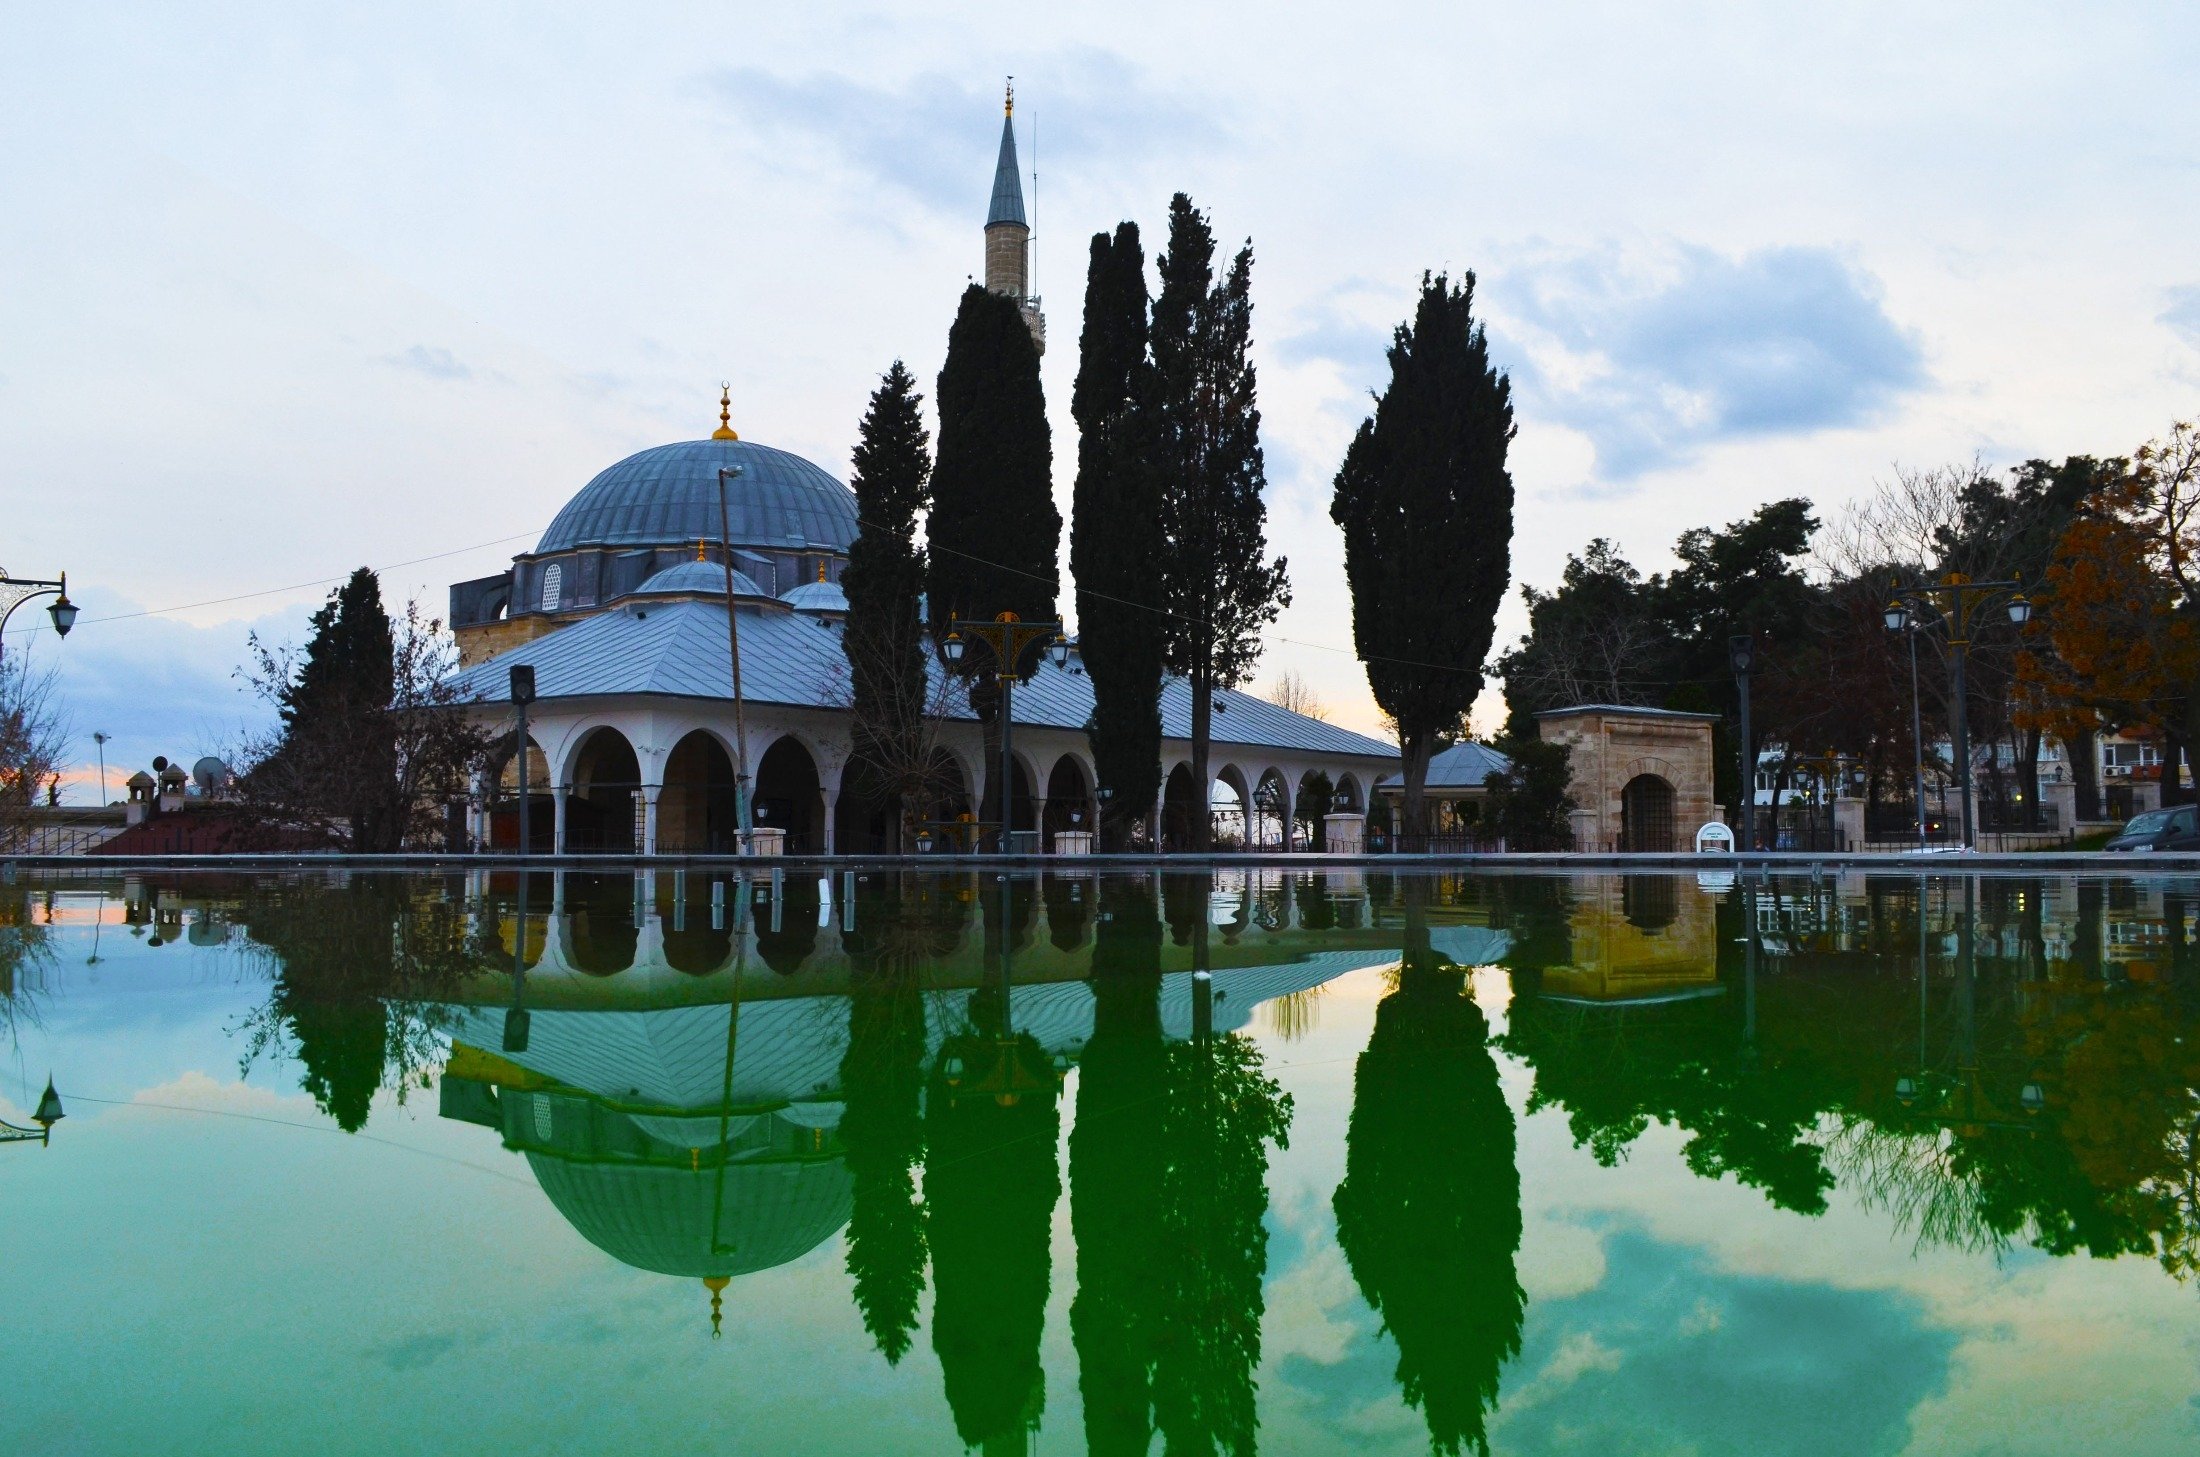 A small pool reflects the view of the famous Old Mosque of Tekirdağ, Turkey. (Shutterstock Photo)